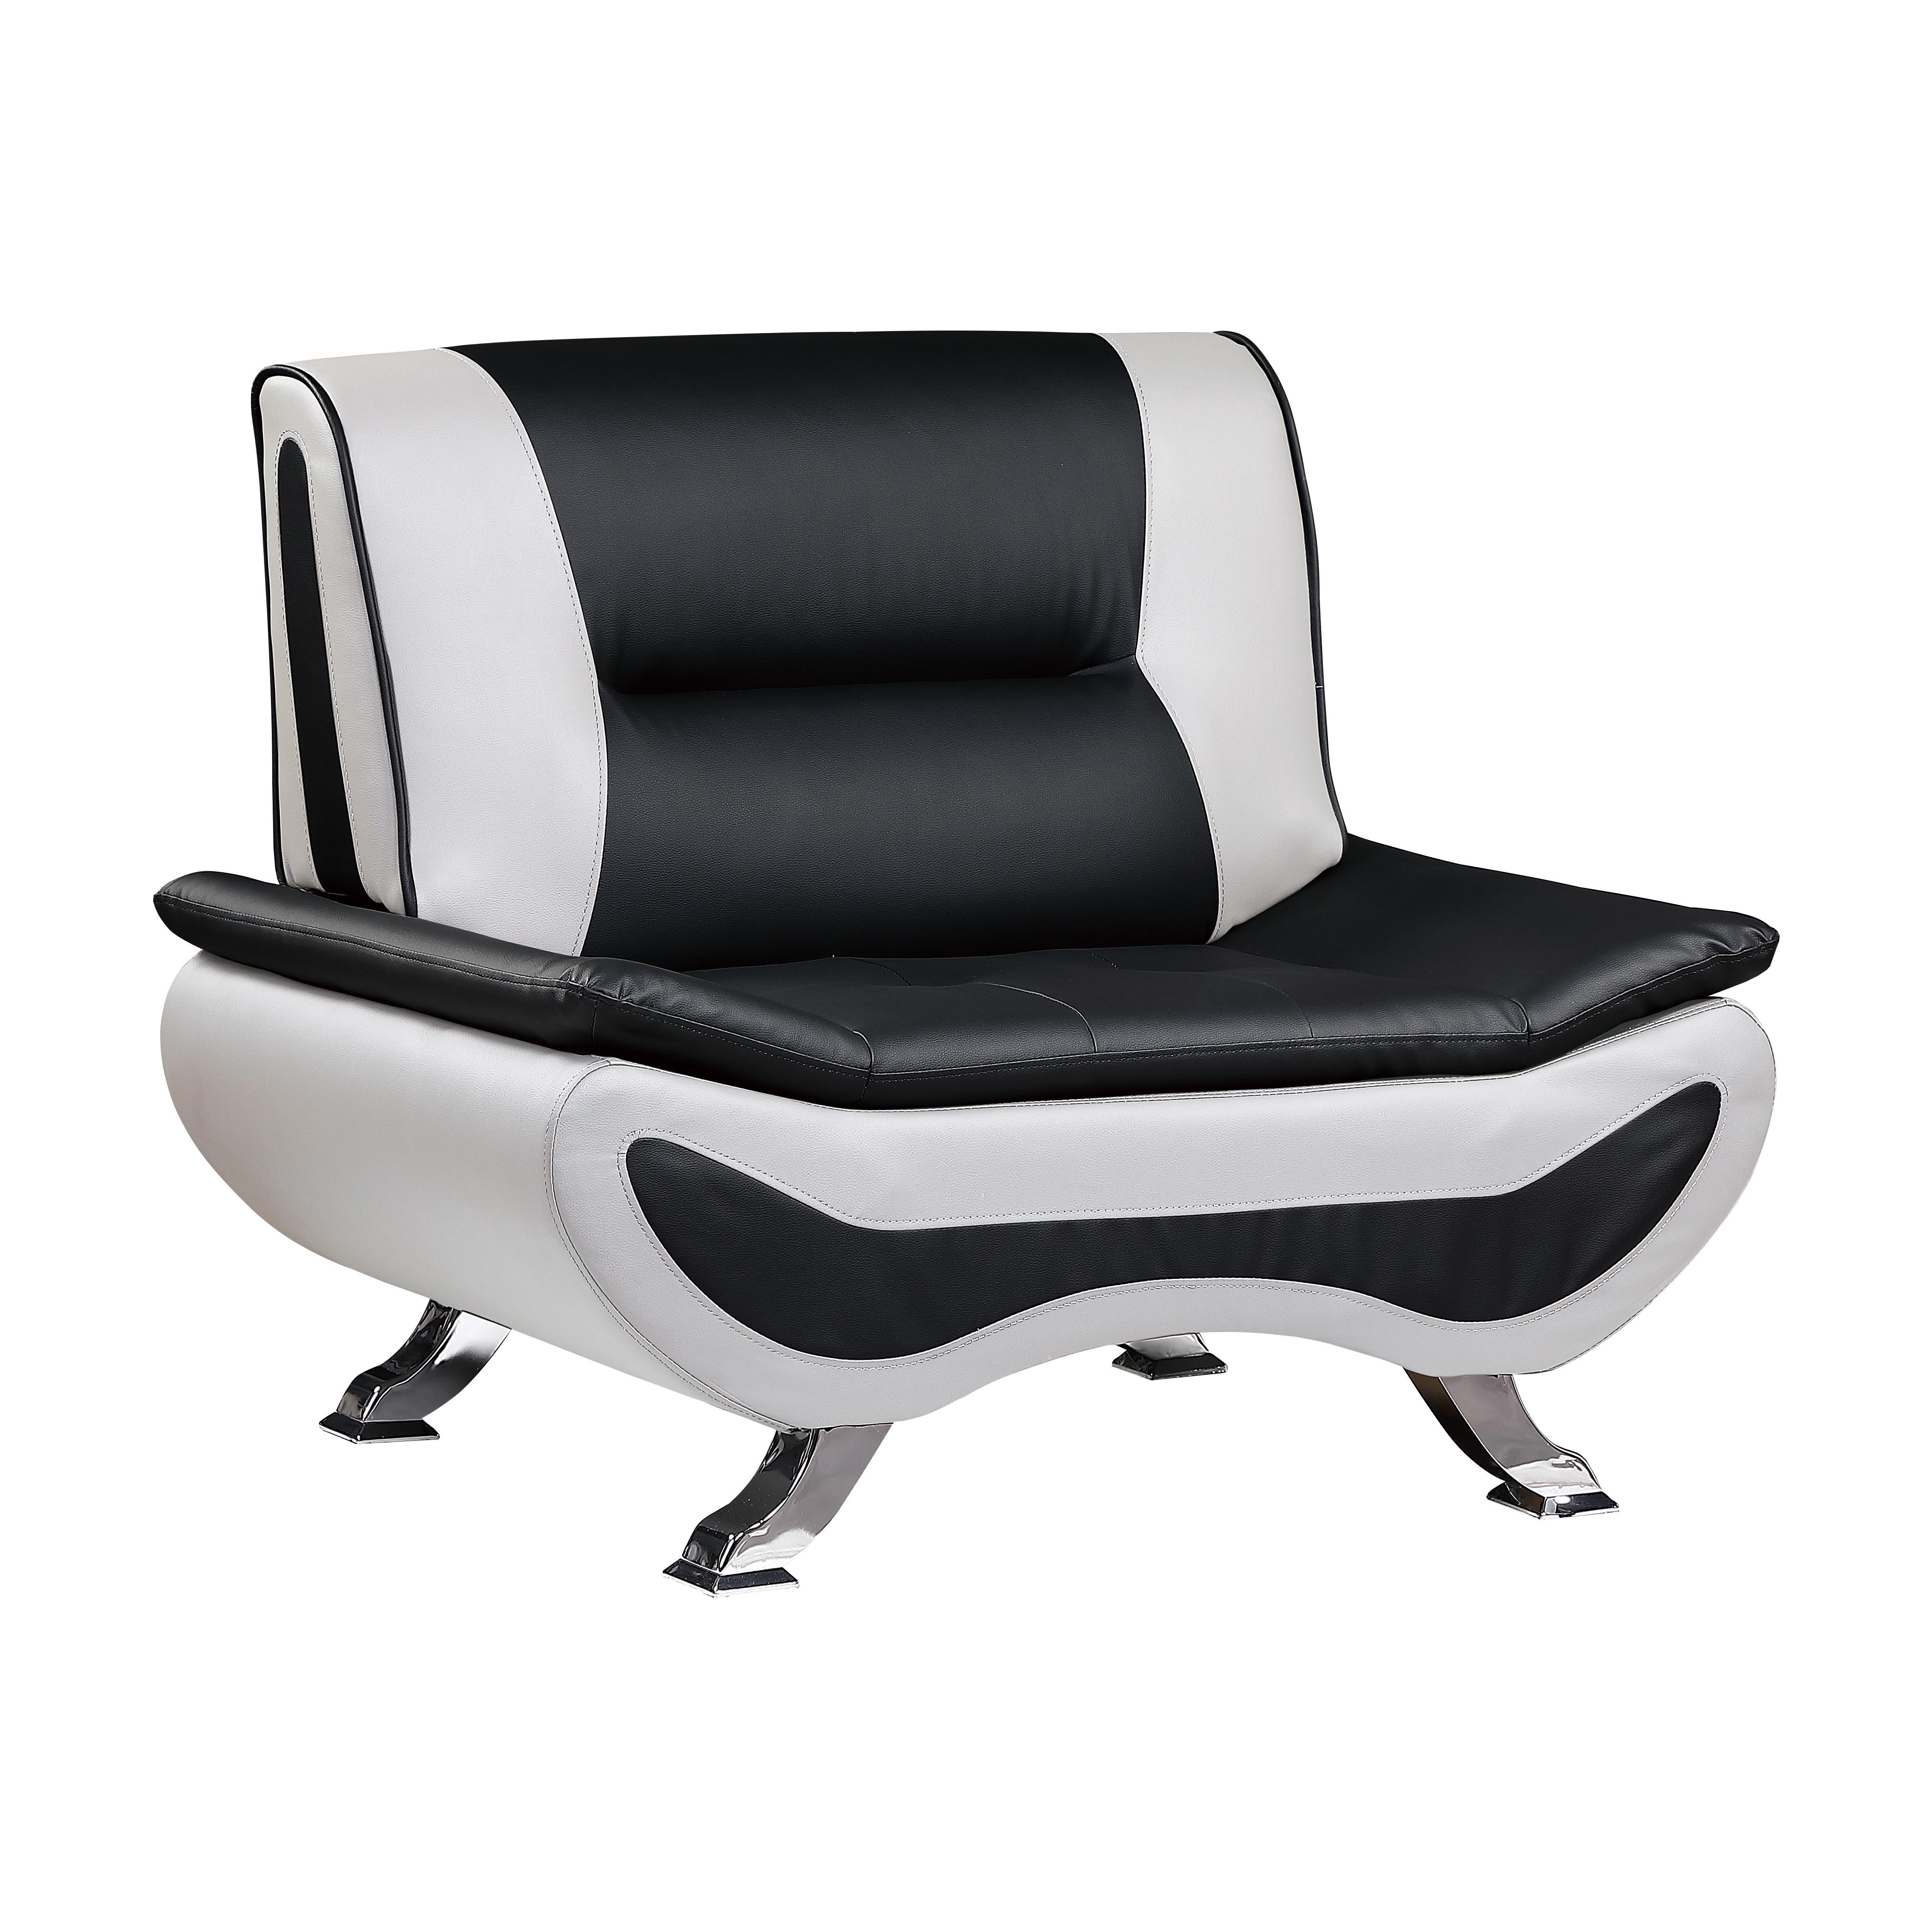 Contemporary Arm Chair 8219-1 Veloce 8219-1 in White, Black Faux Leather